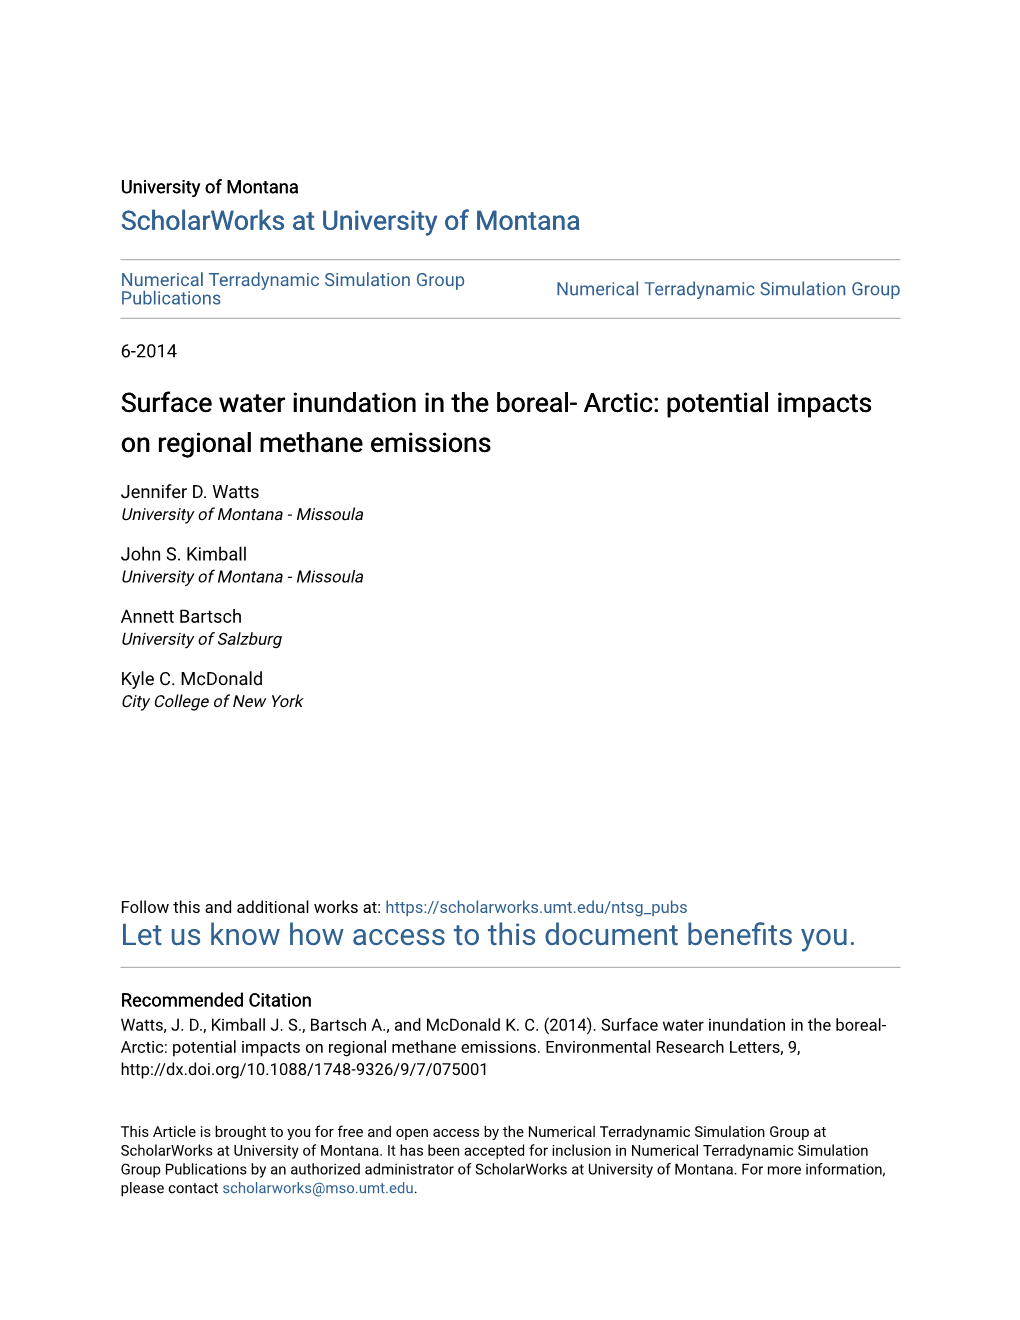 Surface Water Inundation in the Boreal- Arctic: Potential Impacts on Regional Methane Emissions